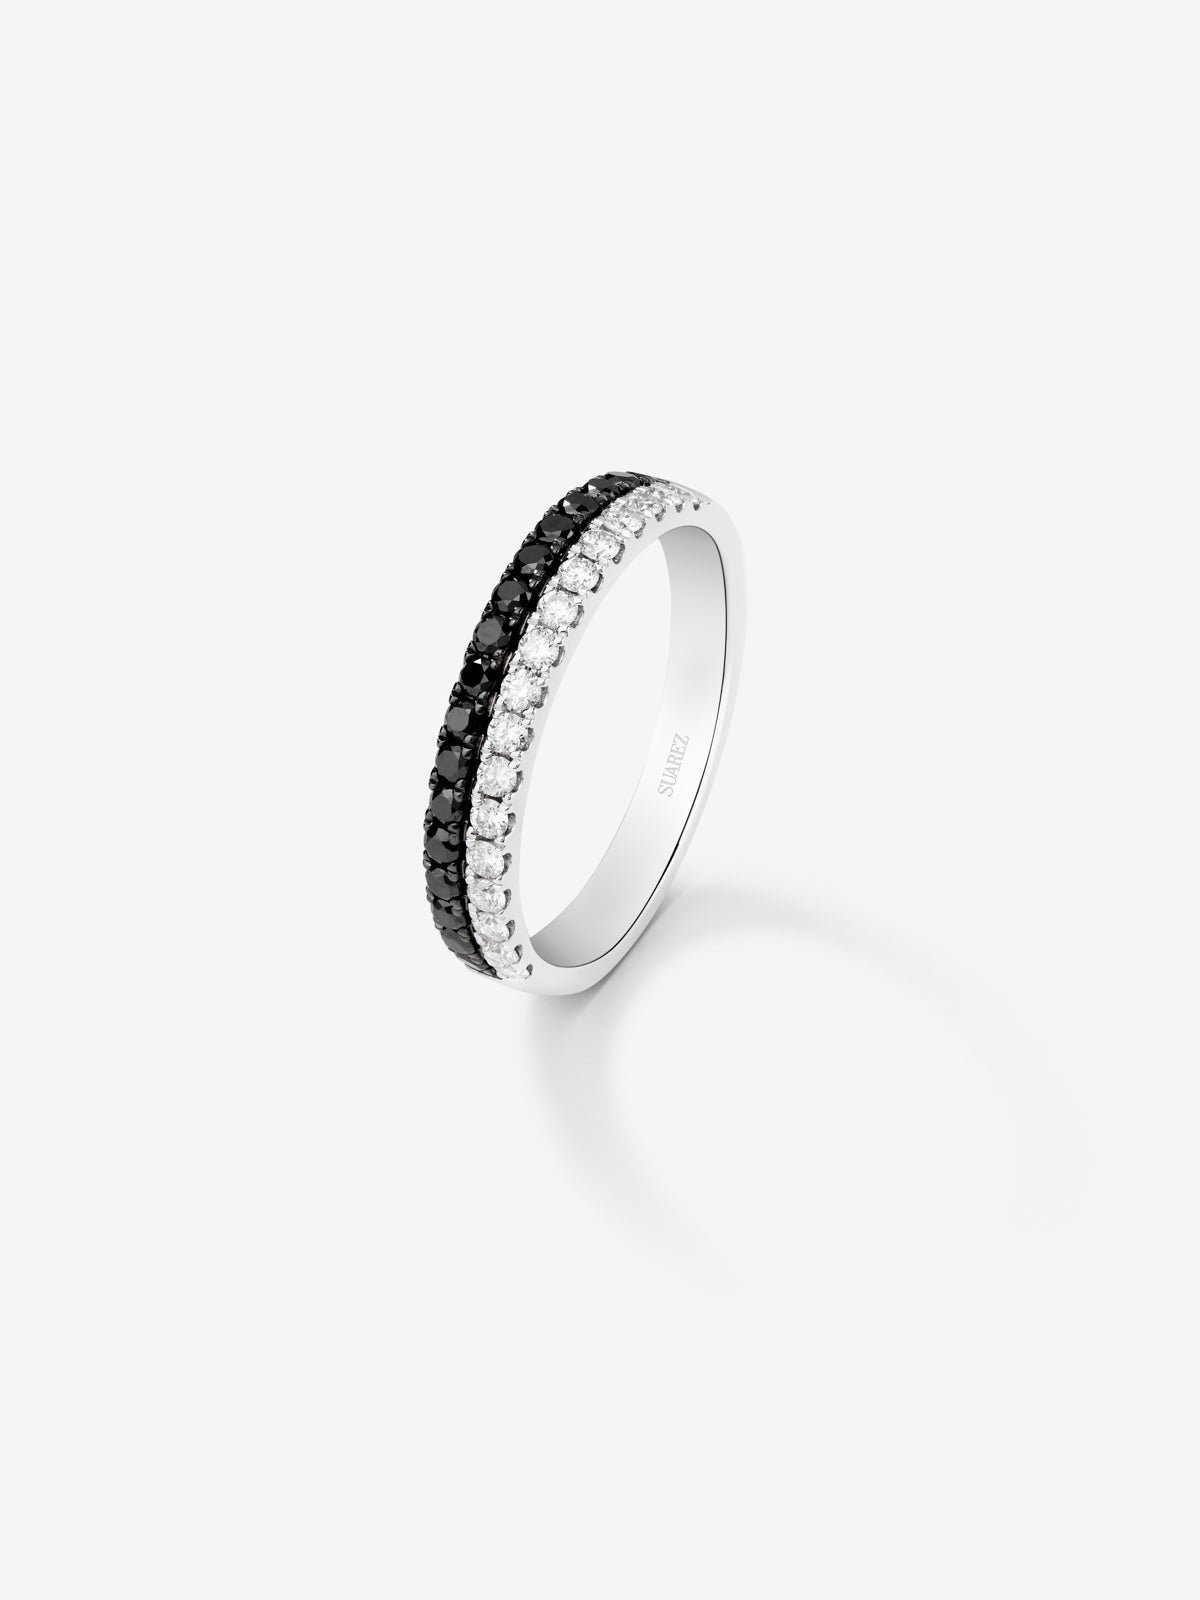 18K white gold ring with 17 brilliant-cut diamonds with a total of 0.24 cts and 17 brilliant-cut black diamonds with a total of 0.27 cts